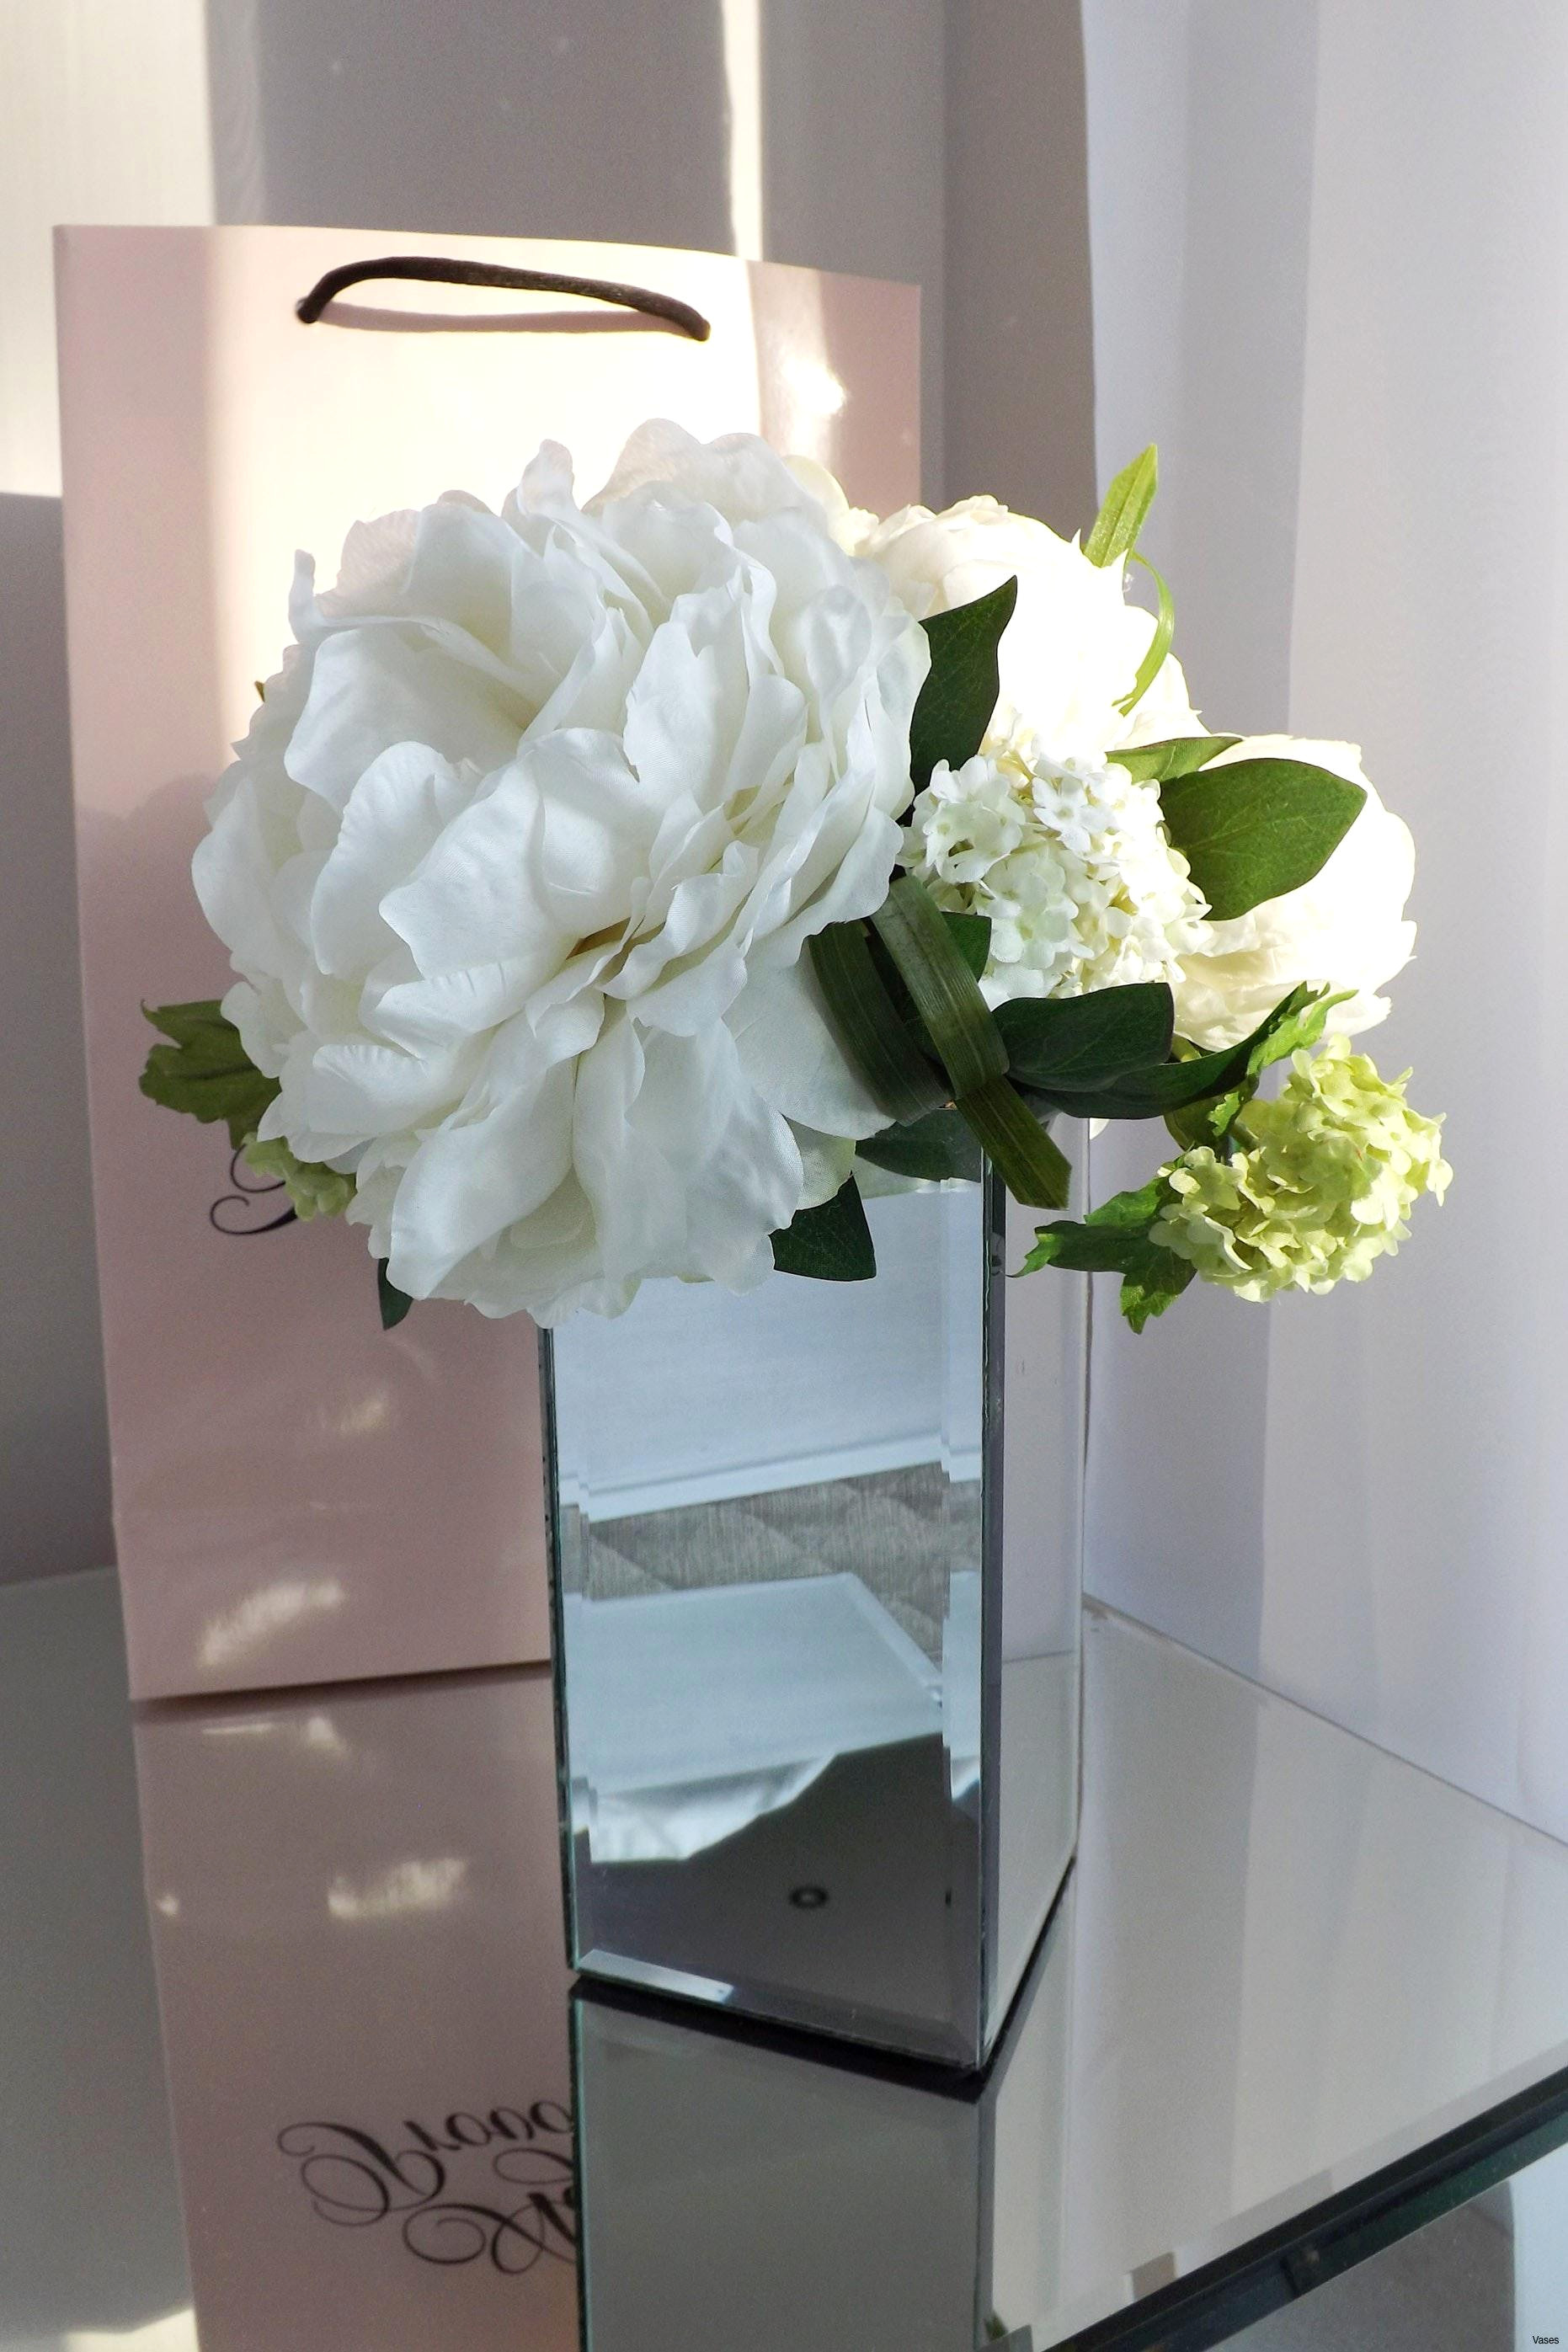 19 Great Picture Frame Vase 2022 free download picture frame vase of walmart wedding decorations best of h vases candy vase i 0d diy with related post